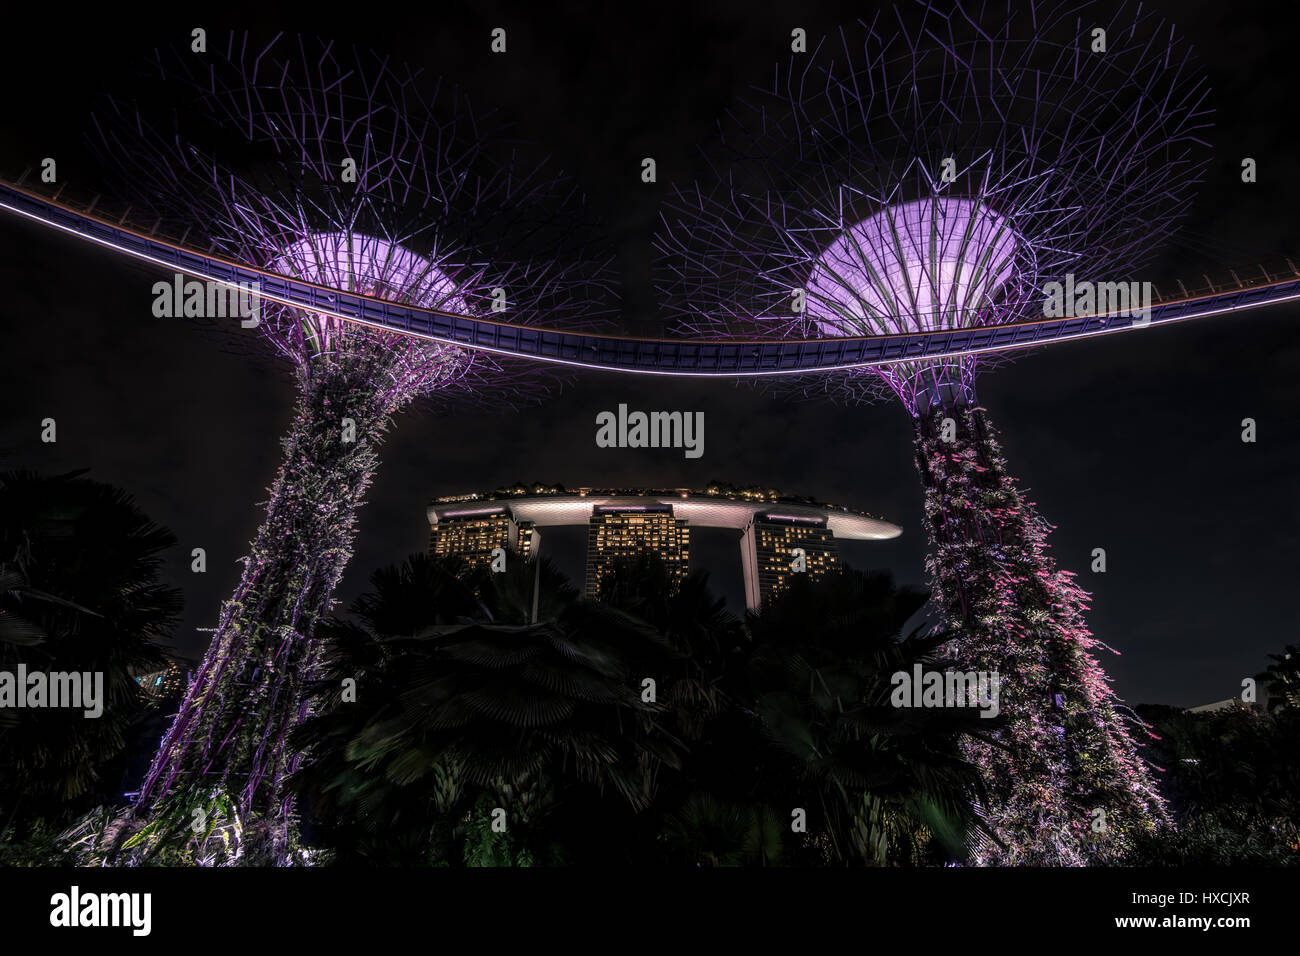 A upwards view of Gardens By The Bay illuminated trees with background view of  Marina Bay Sands hotel in Singapore. Stock Photo